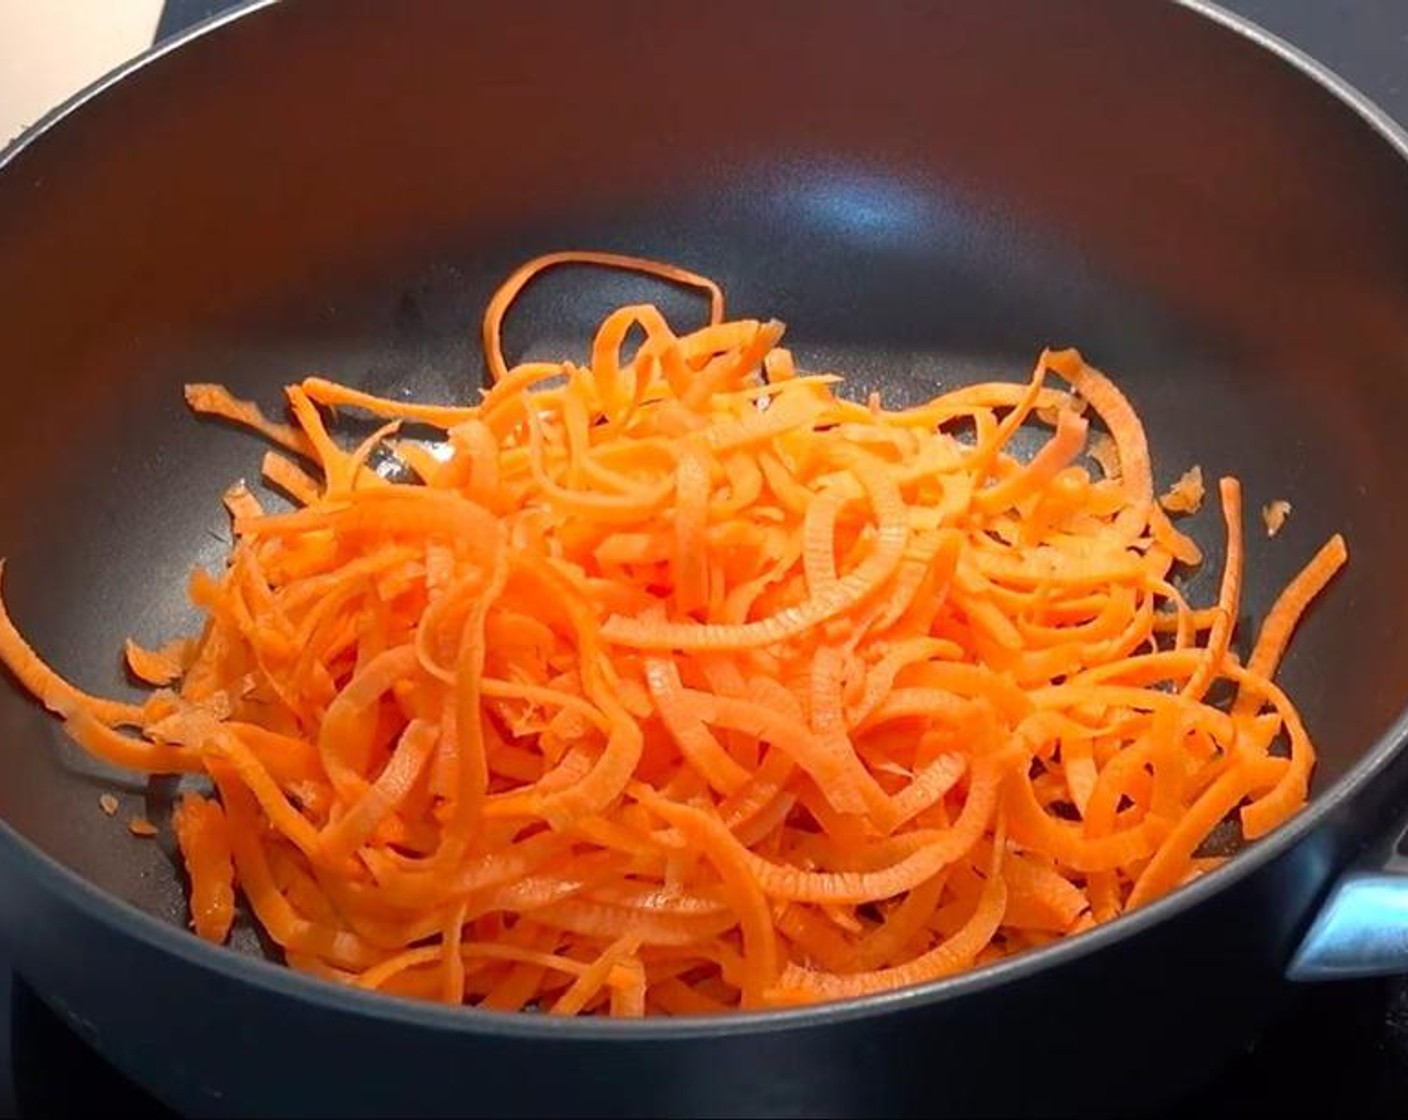 step 3 Pour some oil into a frying pan and add Ground Cumin (1/4 tsp). Put in the spiralized carrots and cook them while stirring until they start to soften.